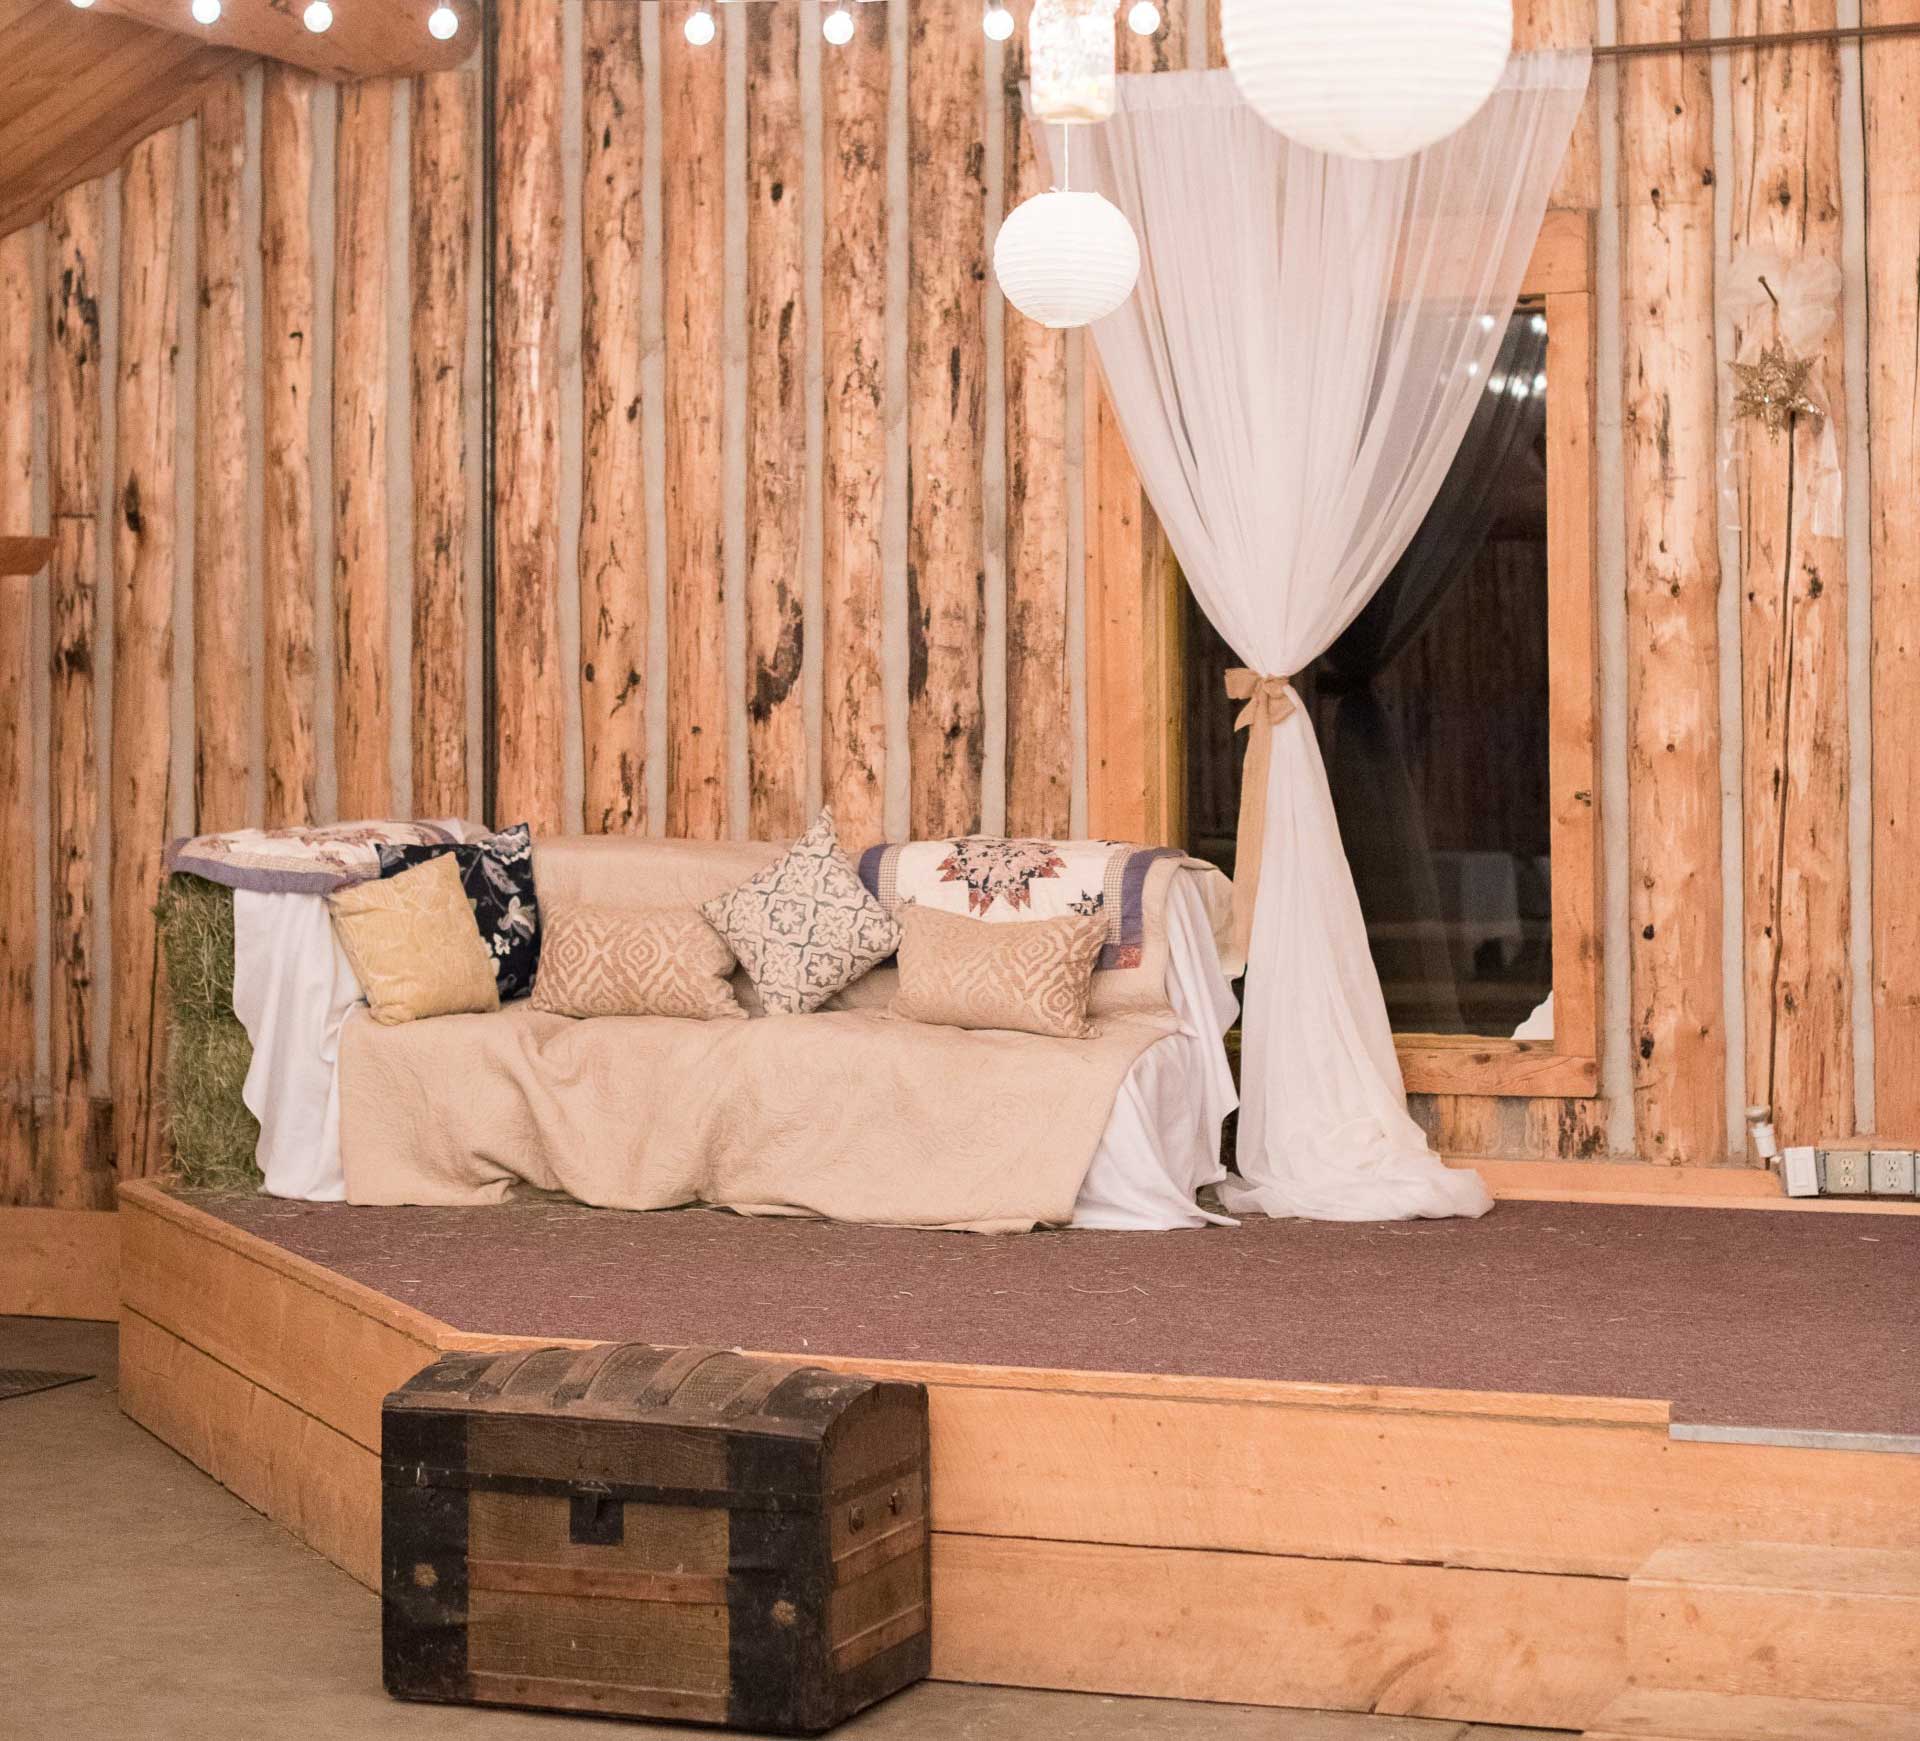 barn interior for wedding with cozy sofa, chest for rustic look and paper lanterns